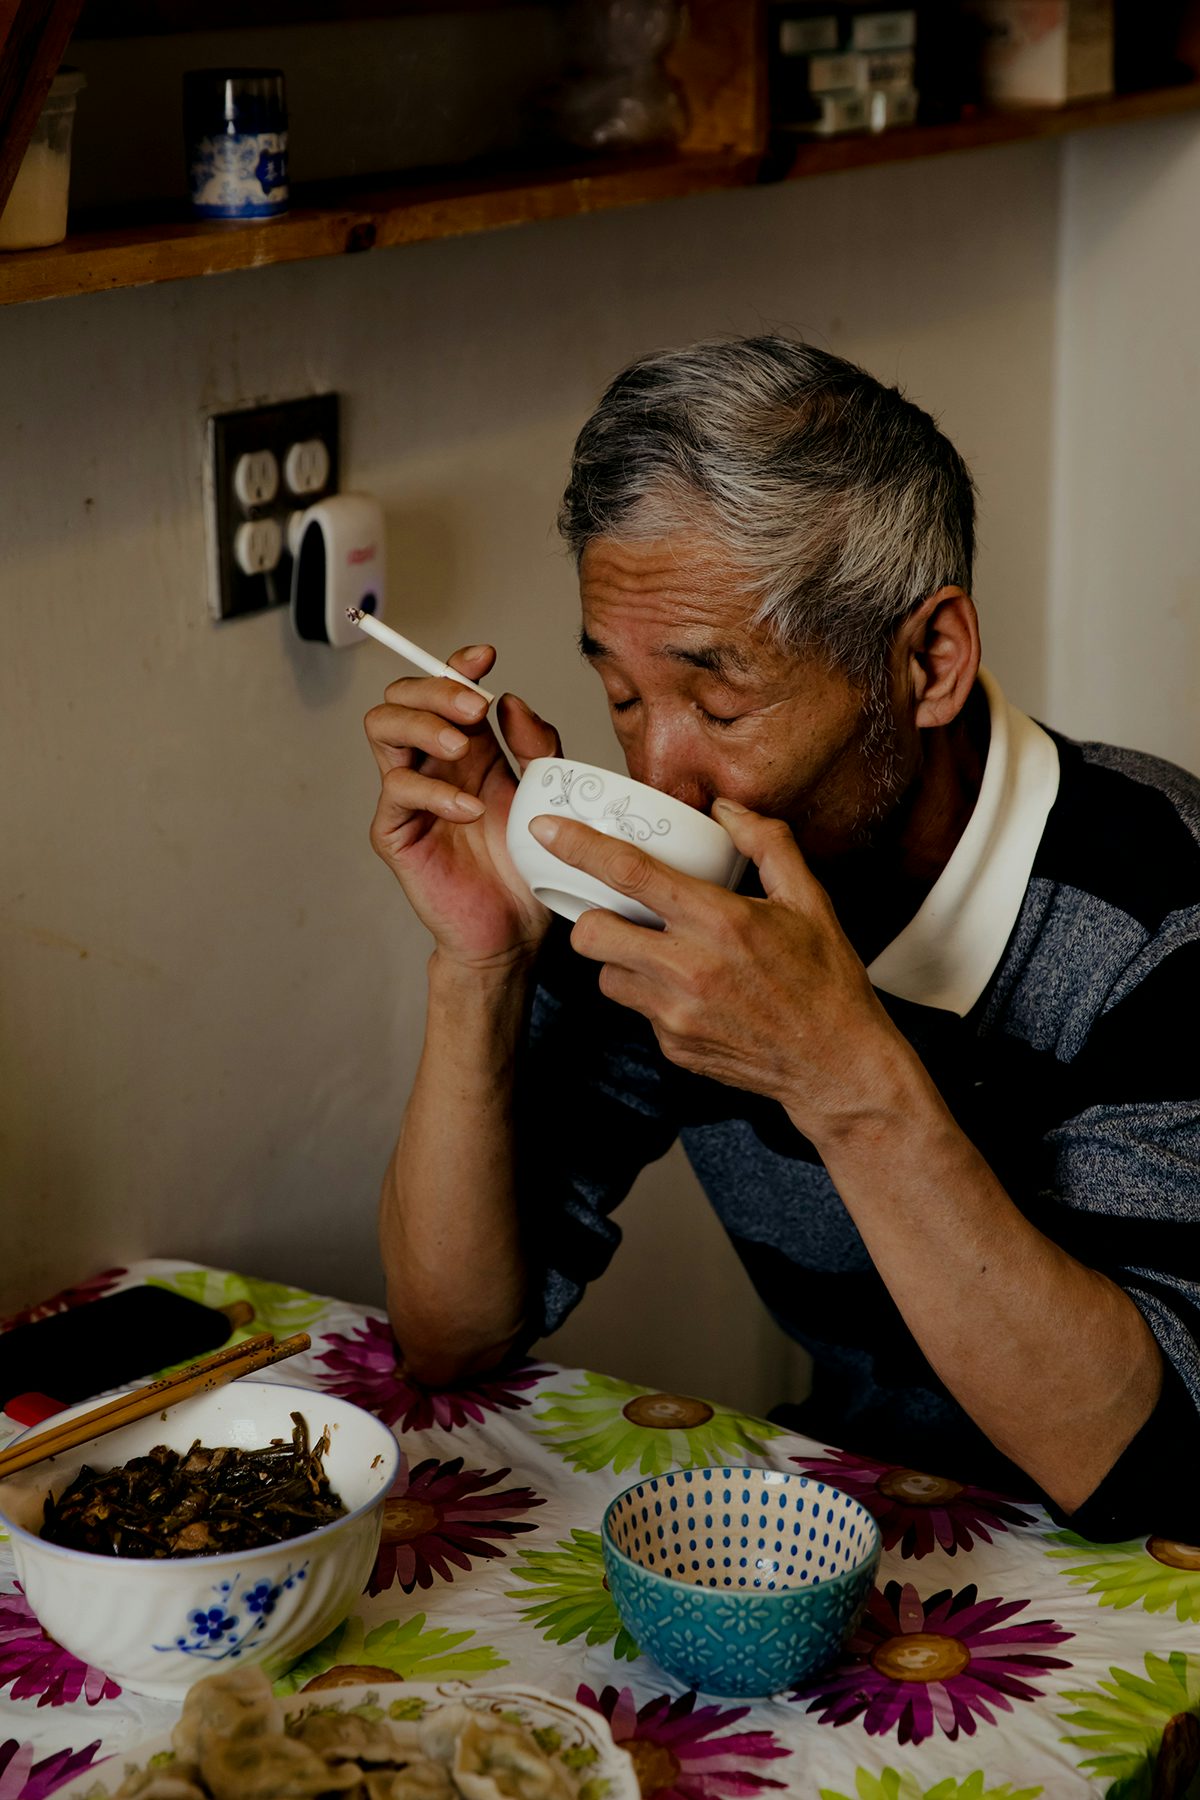 Image by Justin J Wee showing Mr Gao in his kitchen holding a cigarette in one hand and drinking from a bowl held in the other hand